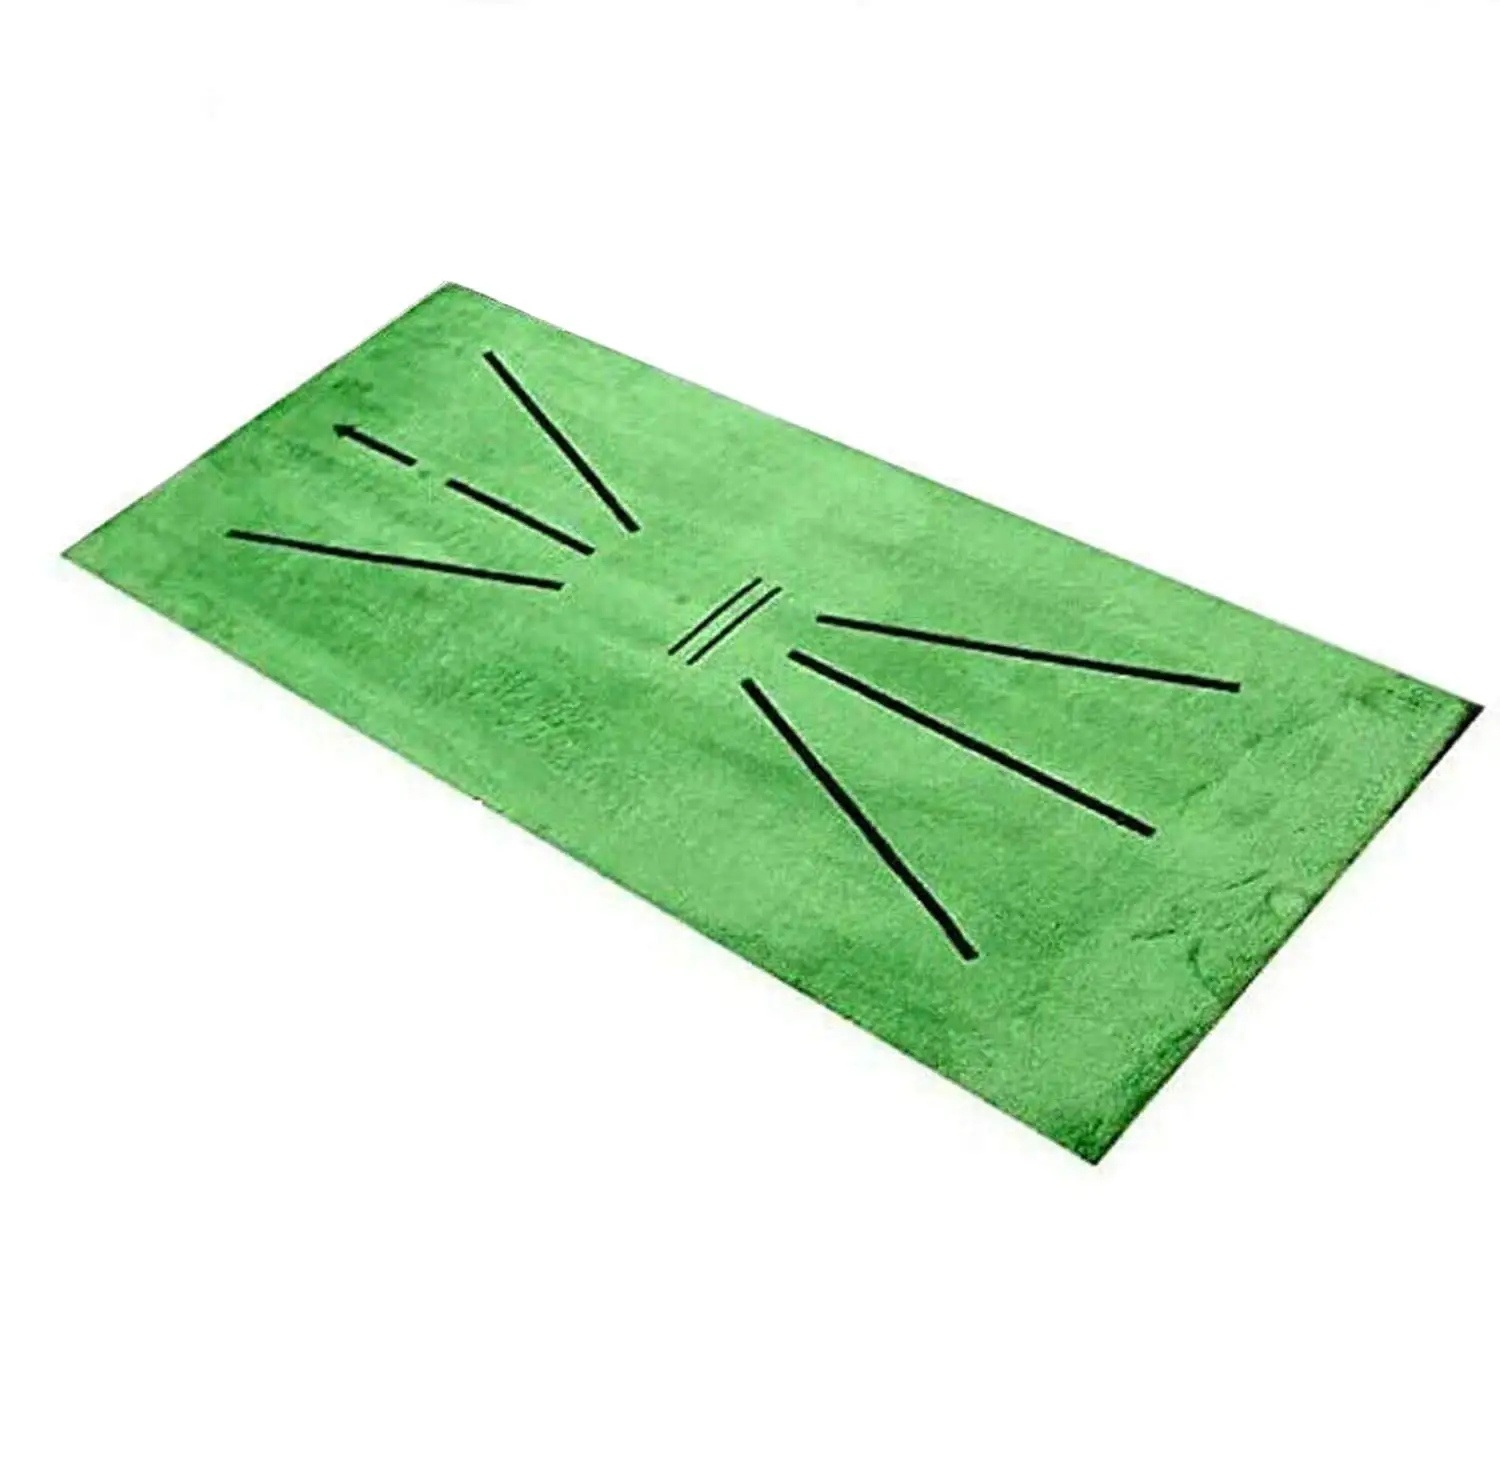 

Golf Training Swing Detection Batting mat Portable Golf Practice Training Auxiliary Games Portable for Indoor and Outdoor